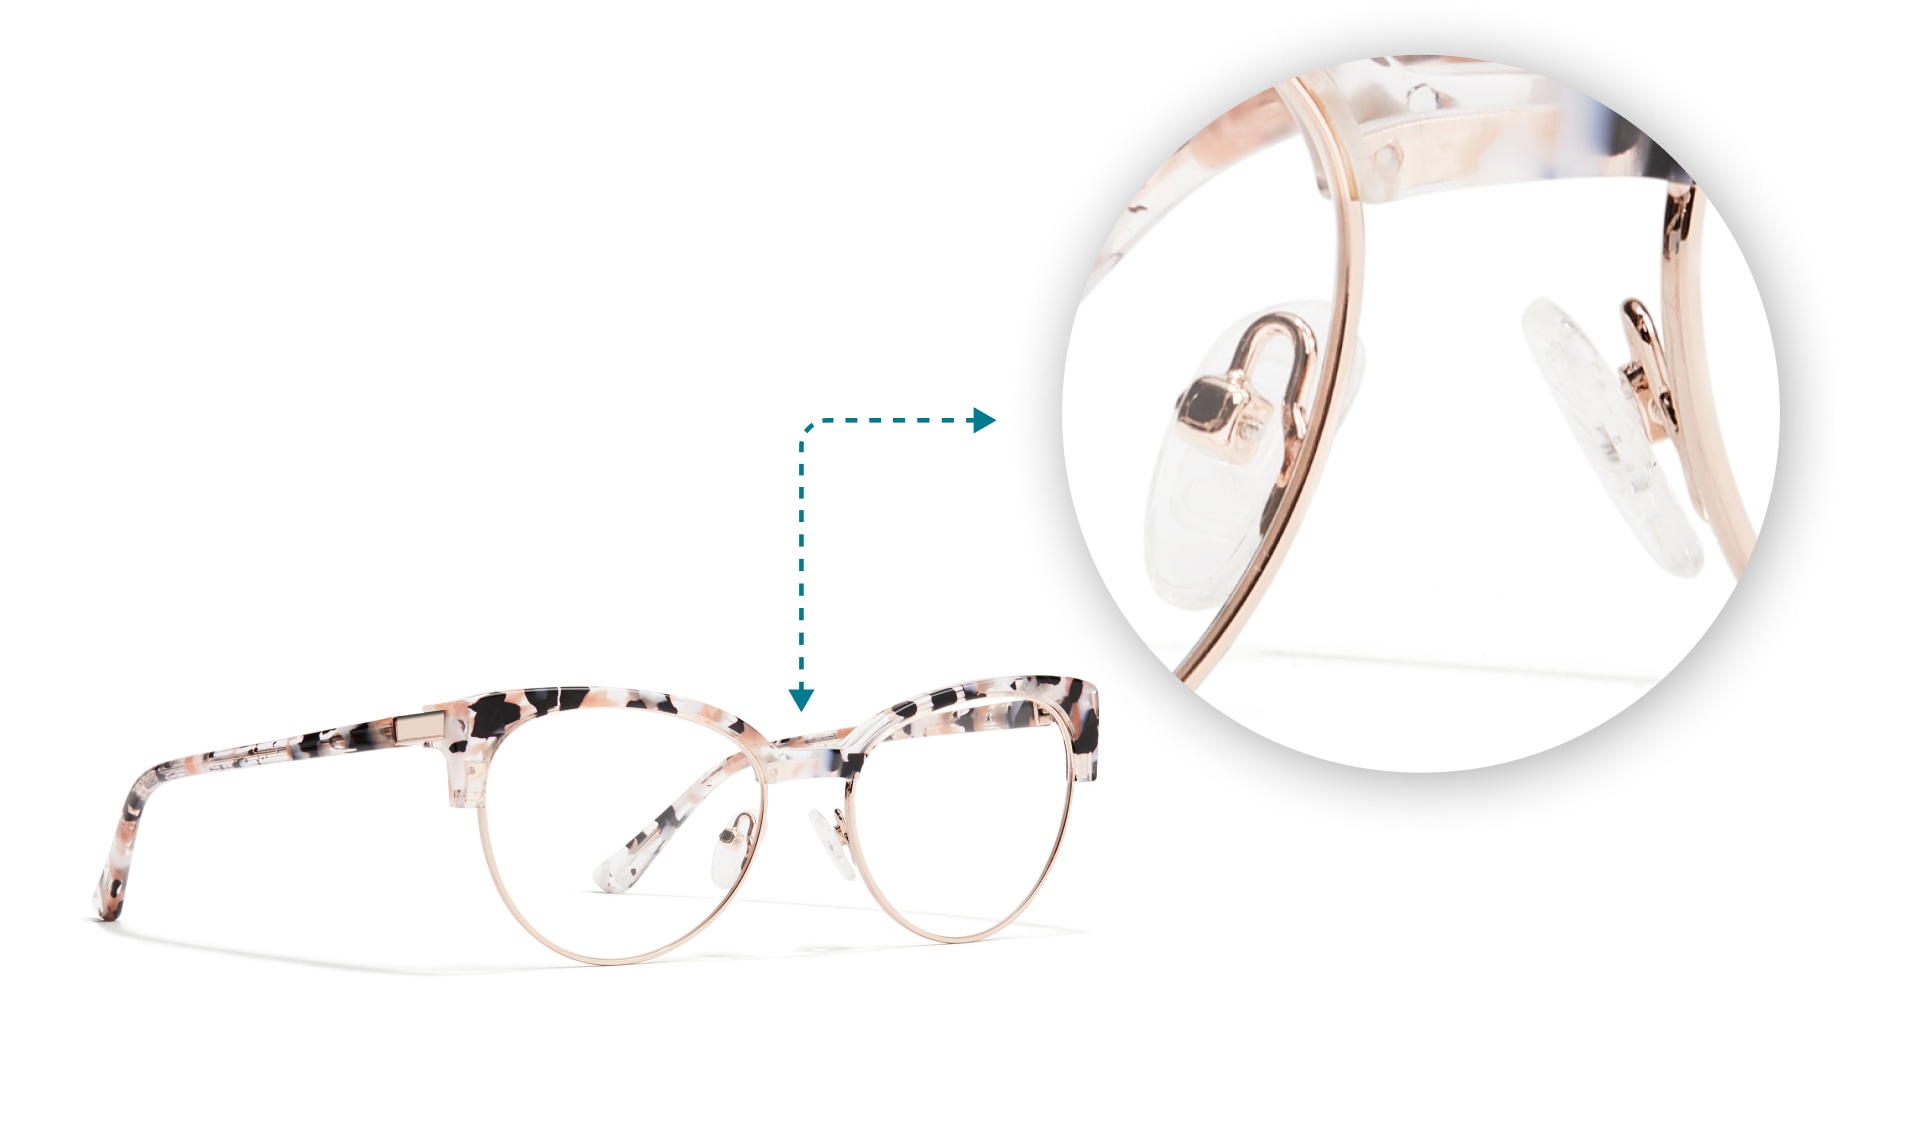 Image of a pair of zenni glasses with adjustable nose pads, next to a zoomed-in image of the nose pads. The images are connected by a dotted line with arrows.